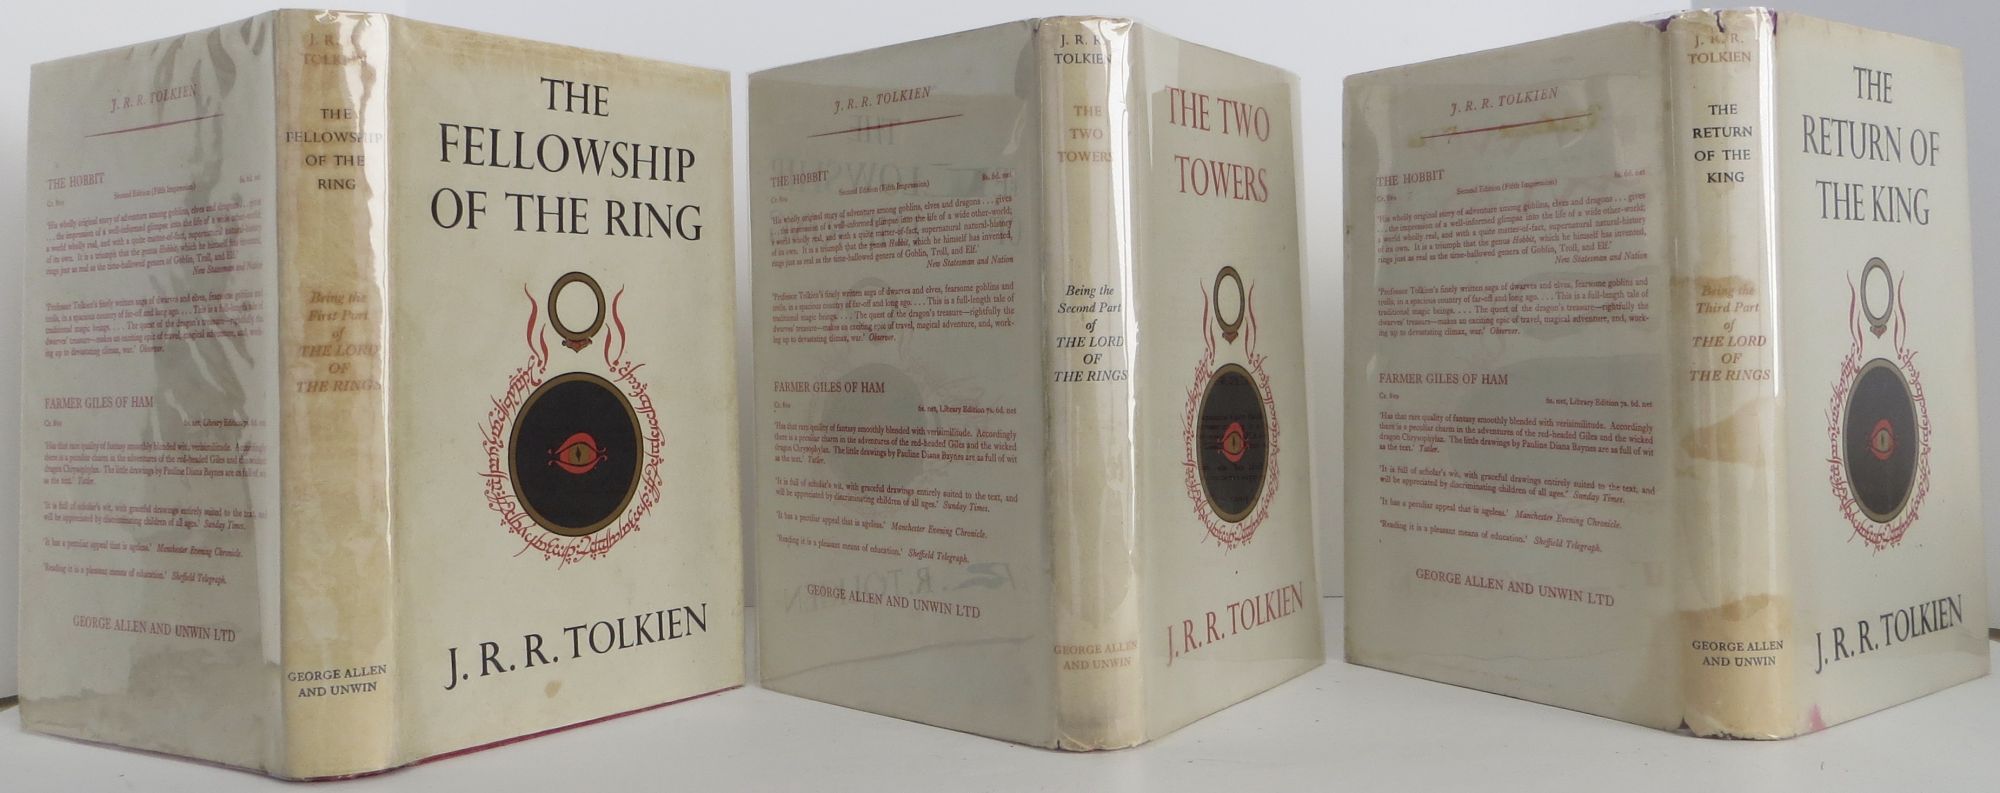 The Two Towers: Being the second part of The Lord of the Rings (Hardcover)